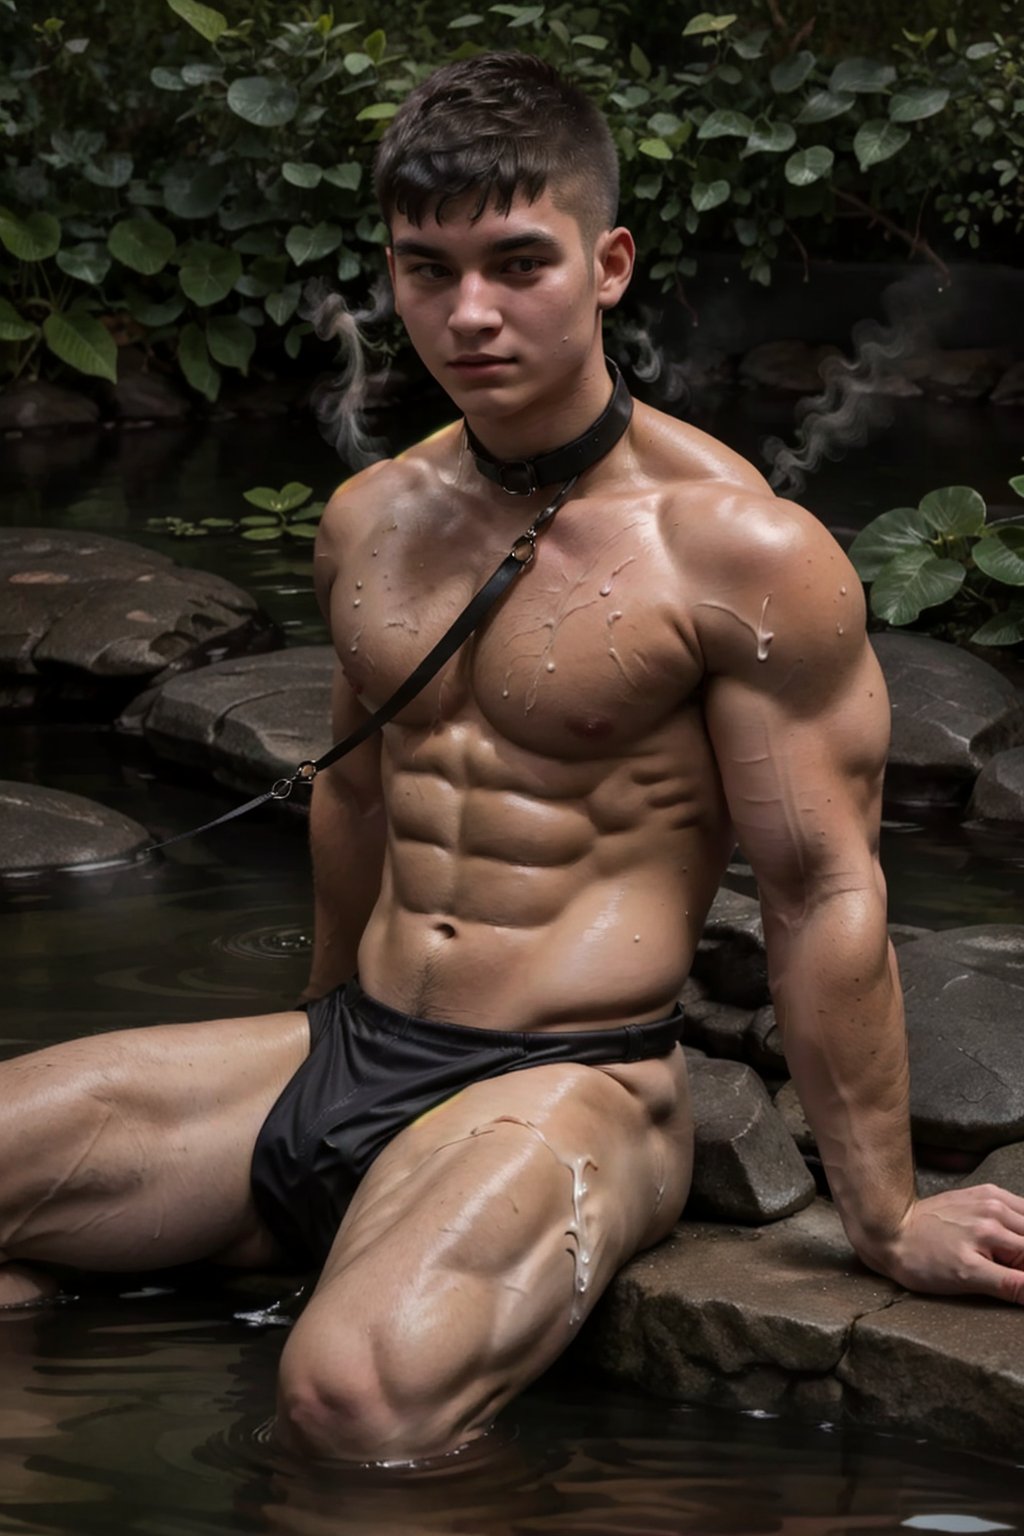 A 25-year-old man, 175cm, 75kg, with a physique boasting 15% body fat and a luscious coat of bushy body hair. He sits comfortably in the warm waters of a natural hot spring, his wide-set eyes gazing out into the distance as he wears a leash collar, adding an air of playful submission to his relaxed demeanor. His upper body is fully immersed in the water, (((only upper body))), (((hot steam)))